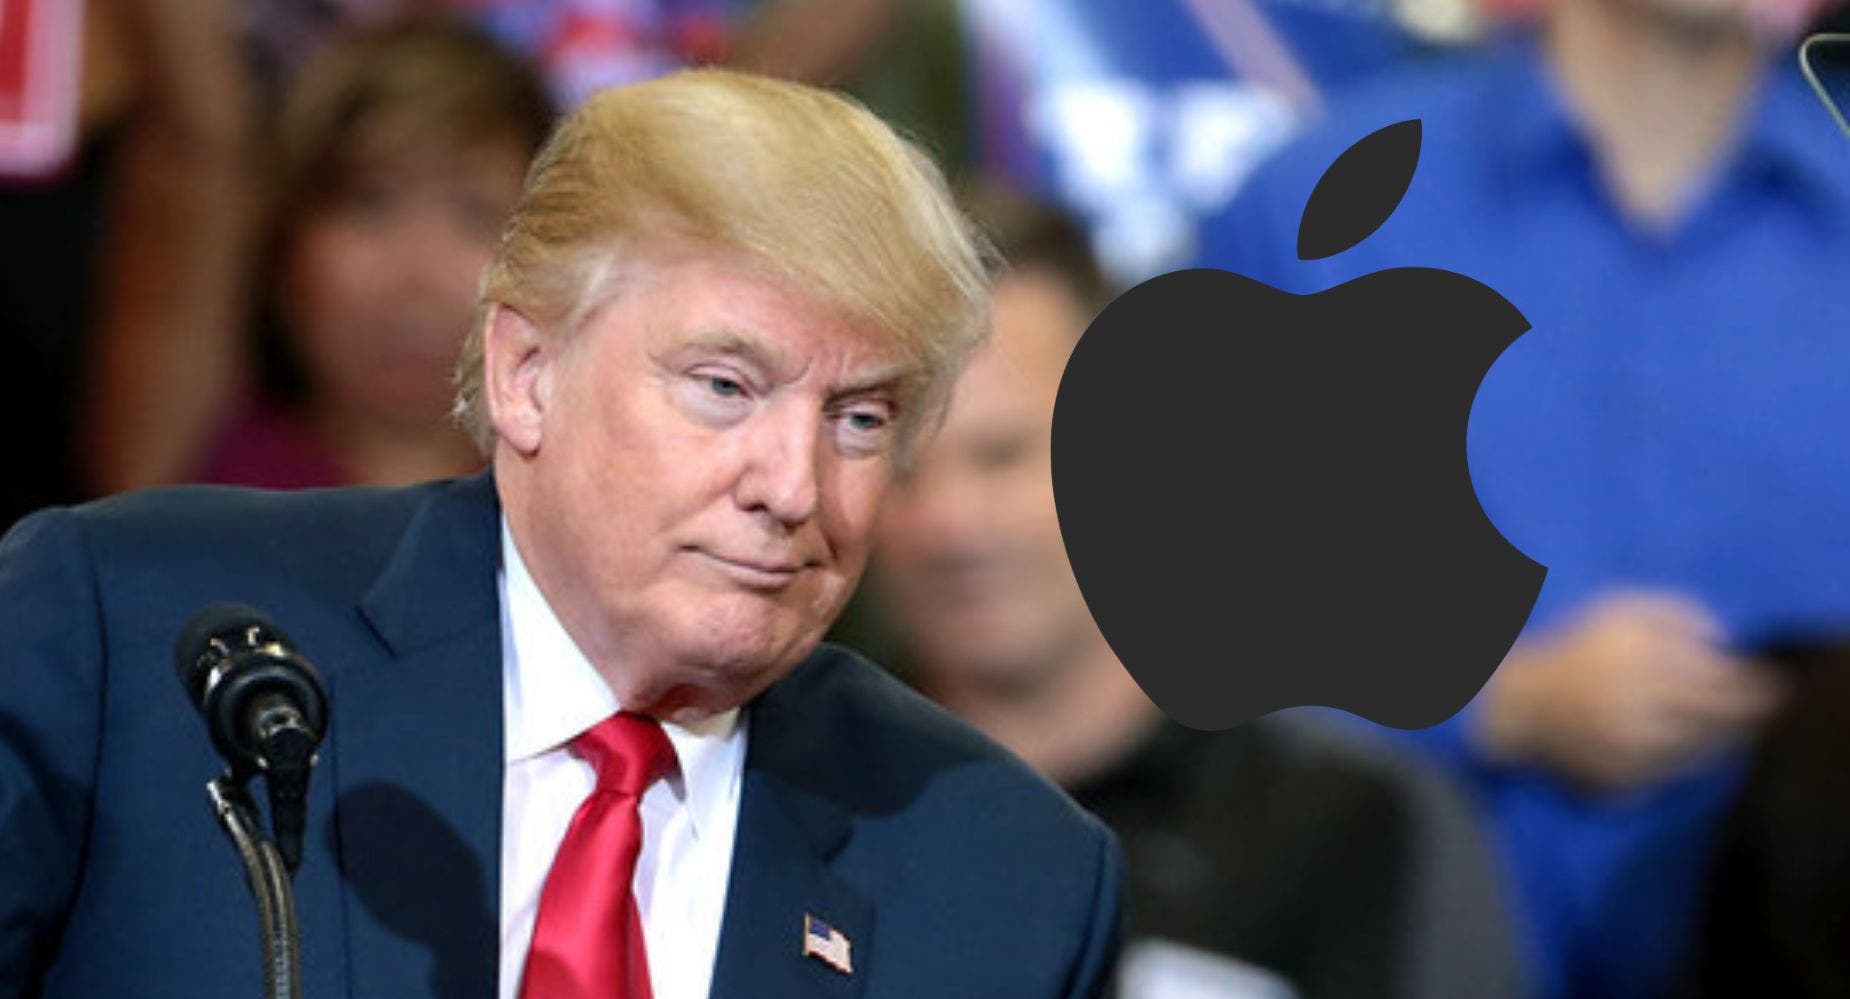 If You Invested $1,000 In Apple Stock When Donald Trump Sold, Here's The 'YUGE' Return You Would Have Today